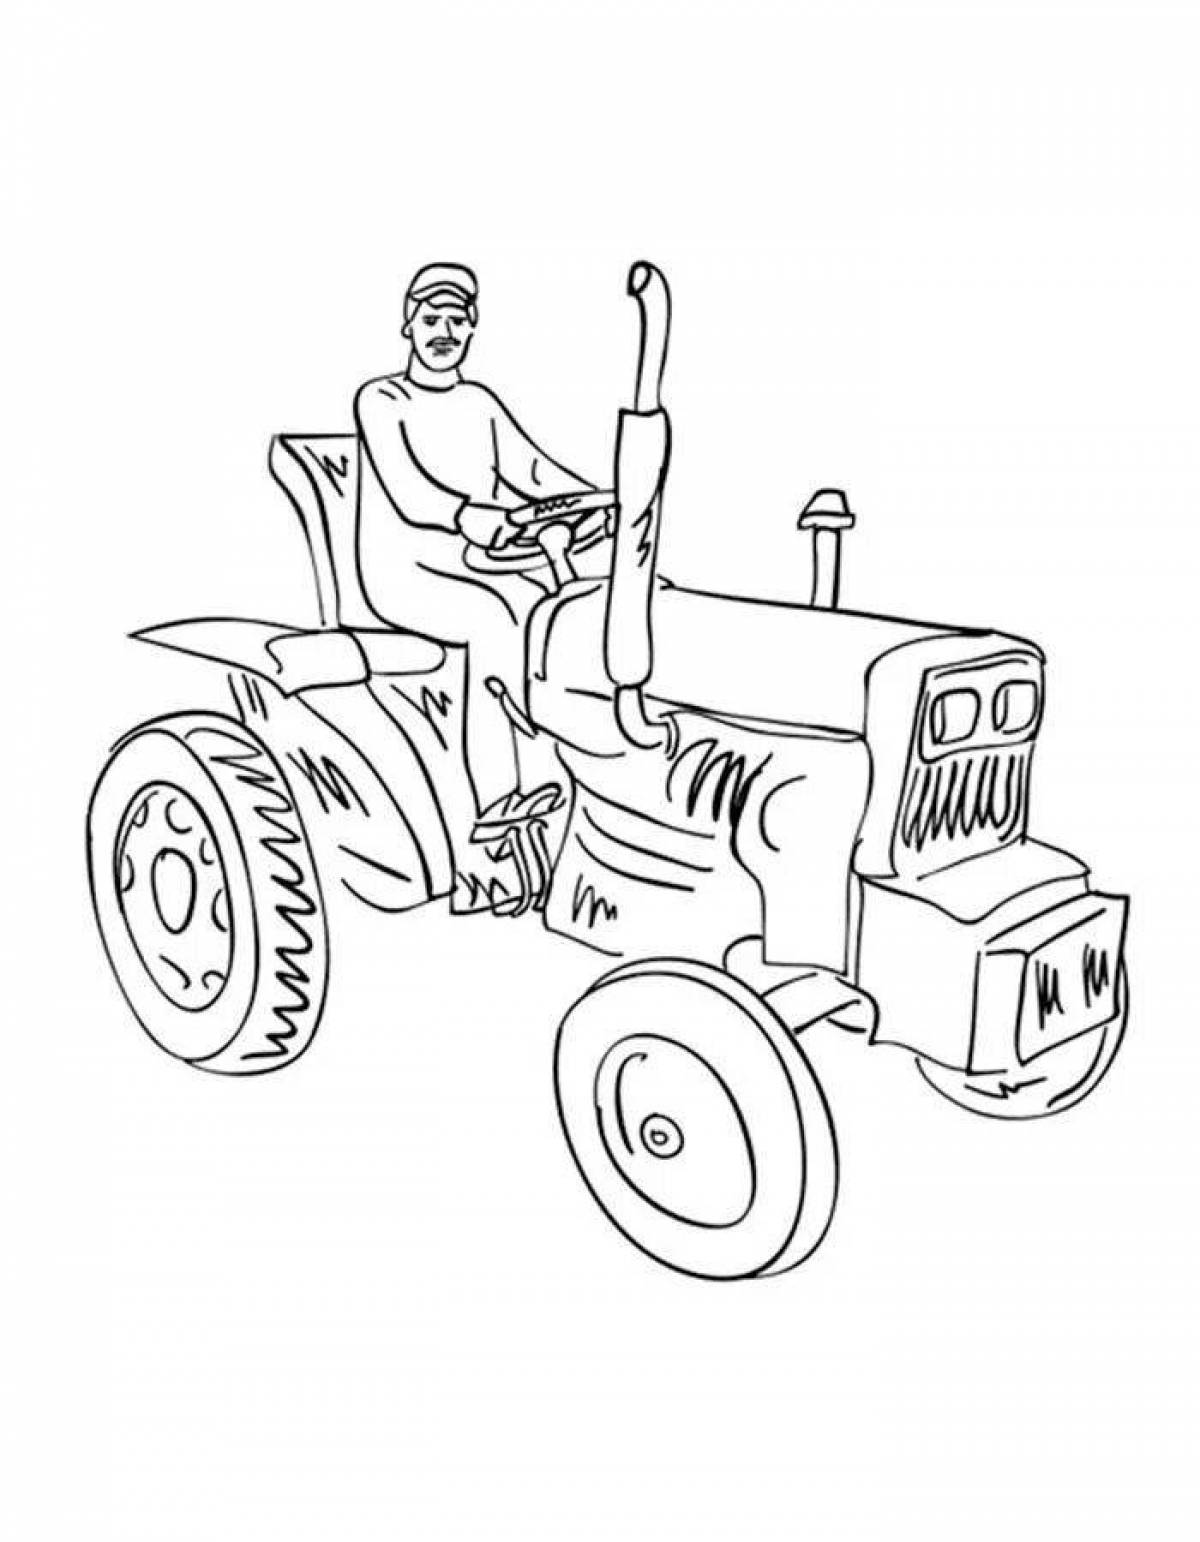 Fancy tractor driver coloring page